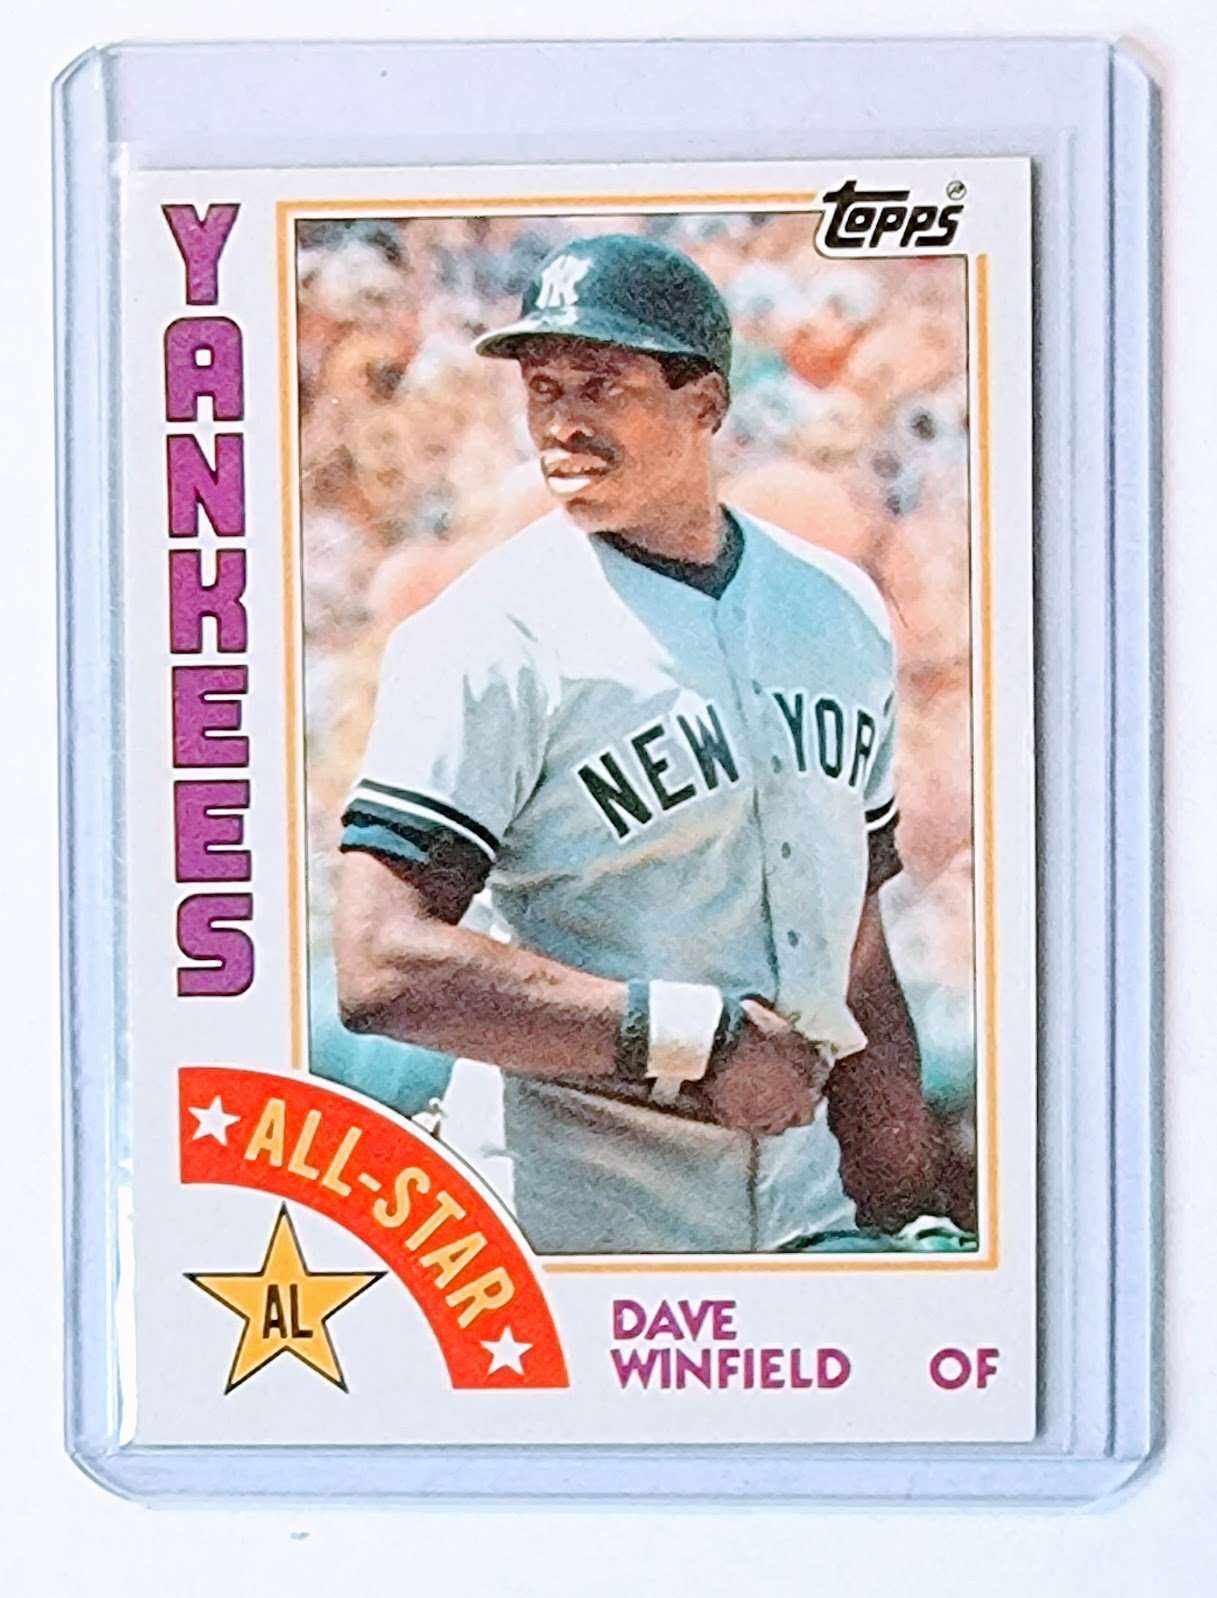 1984 Topps Dave Winfield All Star Baseball Trading Card TPTV simple Xclusive Collectibles   